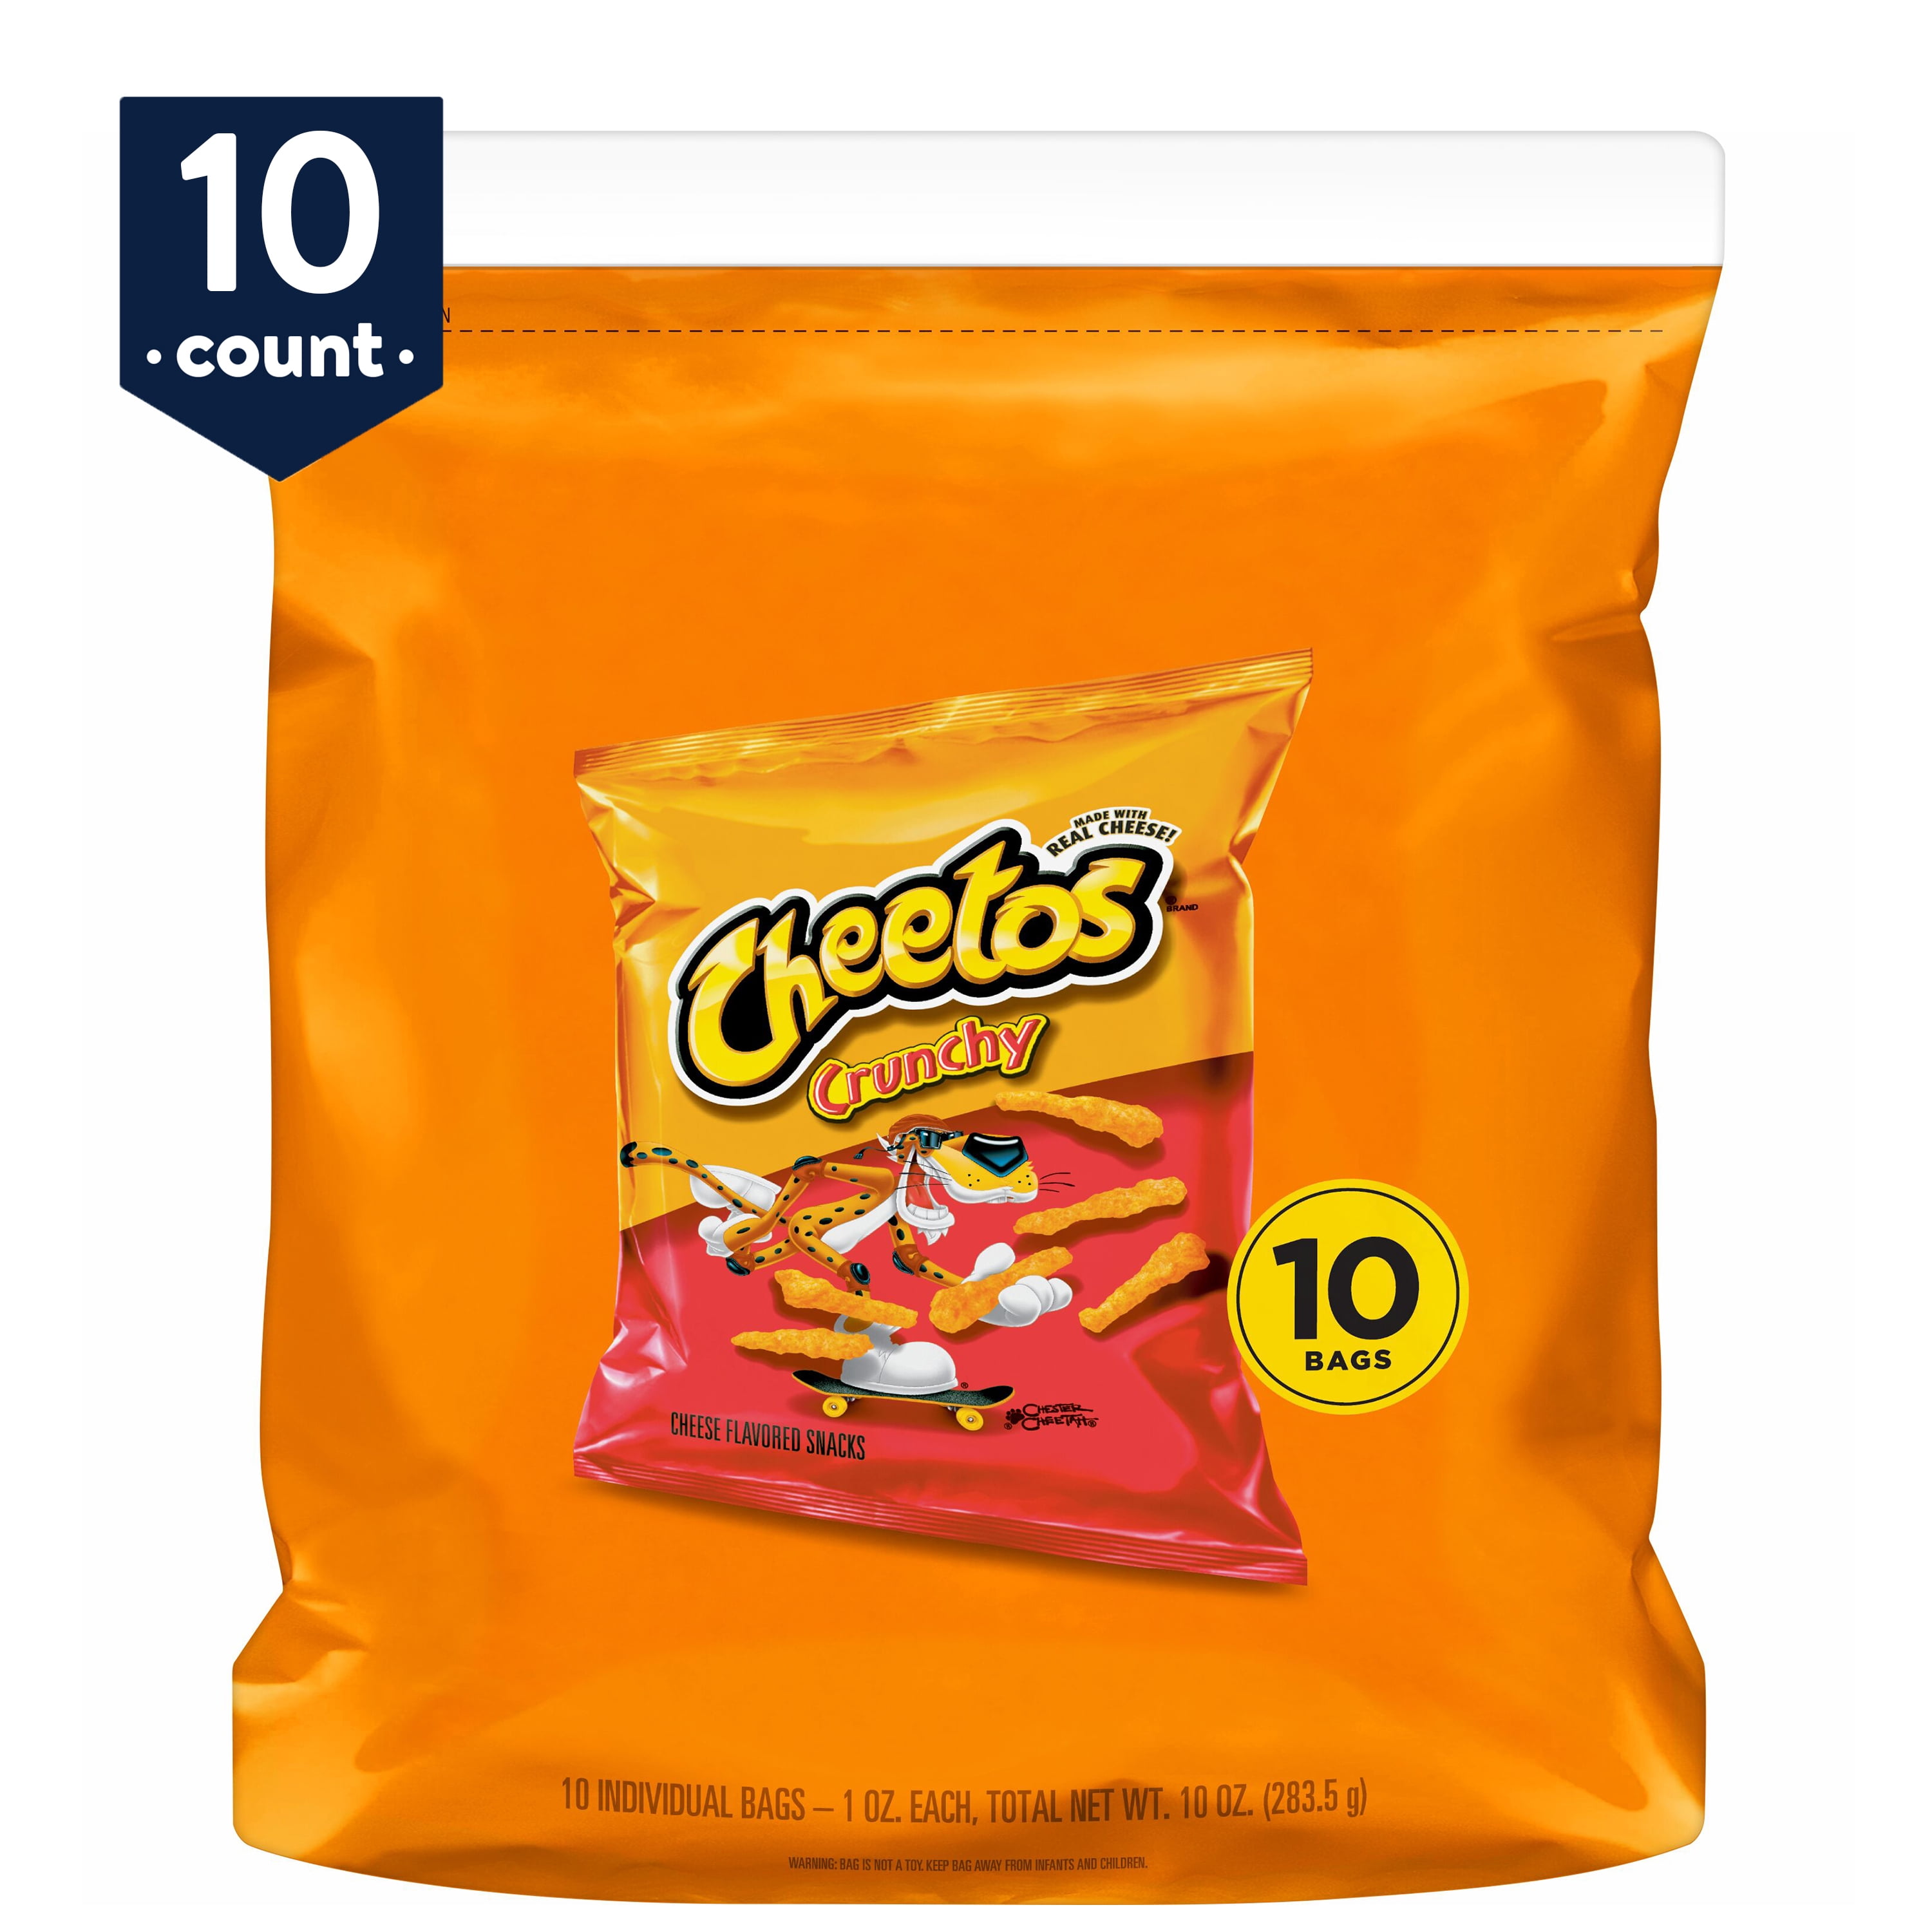 Cheetos Crunchy Cheese Flavored Snacks, 1 Ounce (Pack of 104)